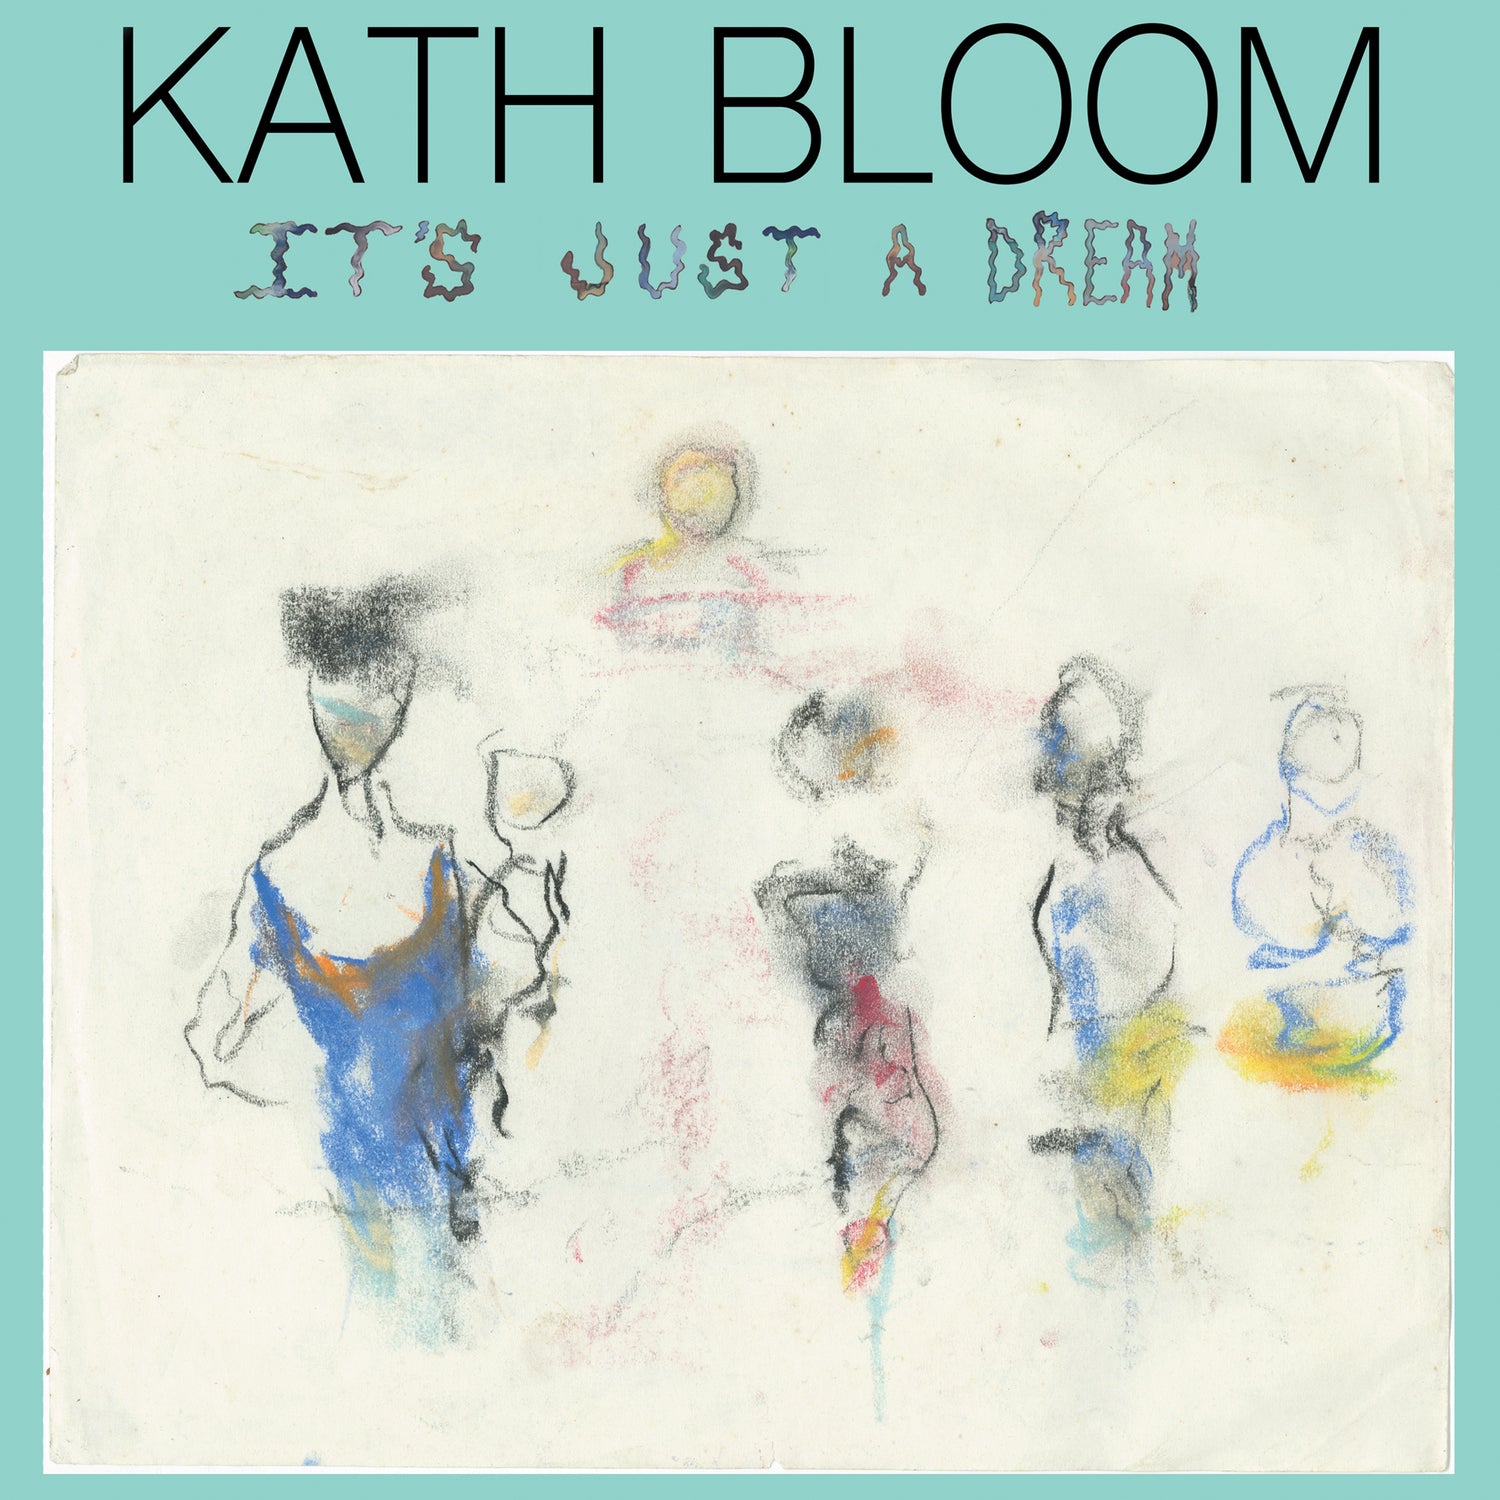 Kath Bloom - It's Just a Dream